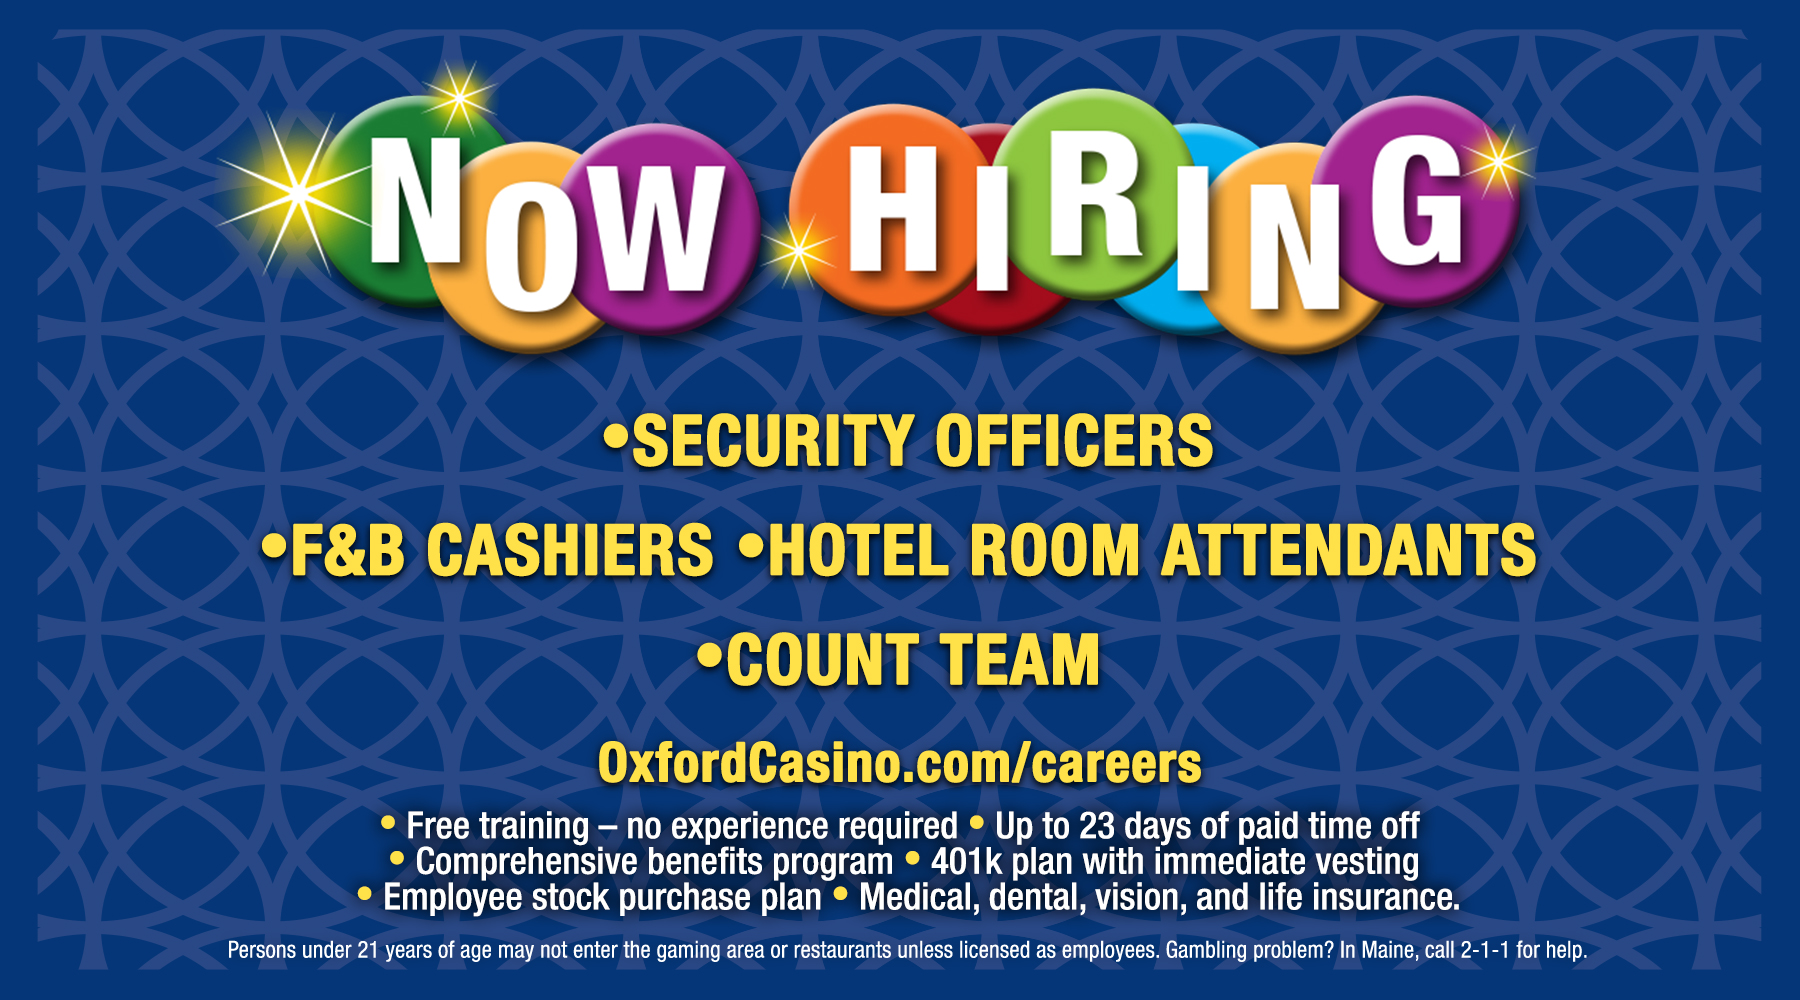 NOW HIRING at Oxford Casino